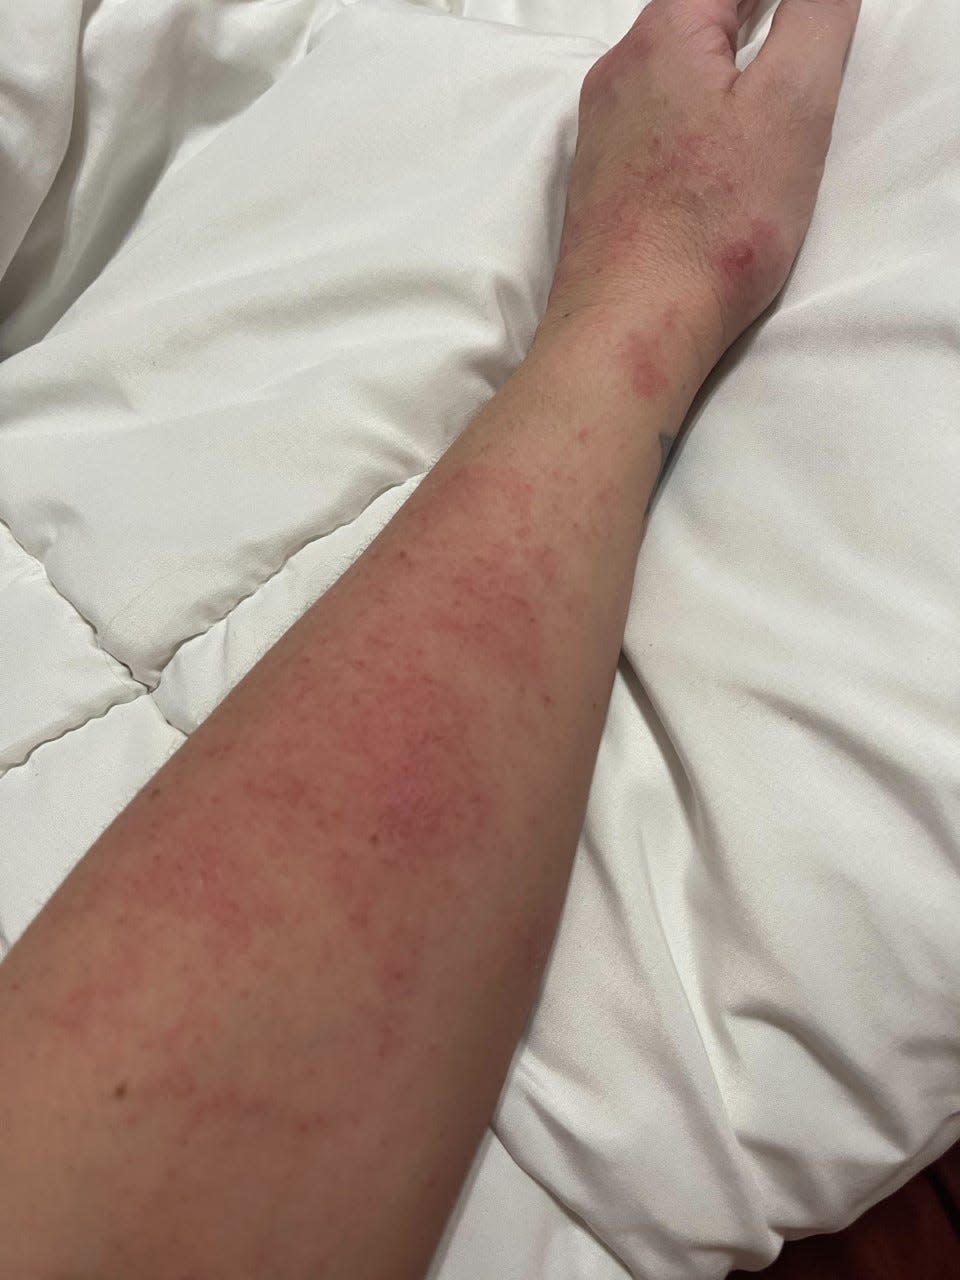 Hives on her arm are a "typical daily reaction" from alpha-gal syndrome, Jaclynn Scott said.